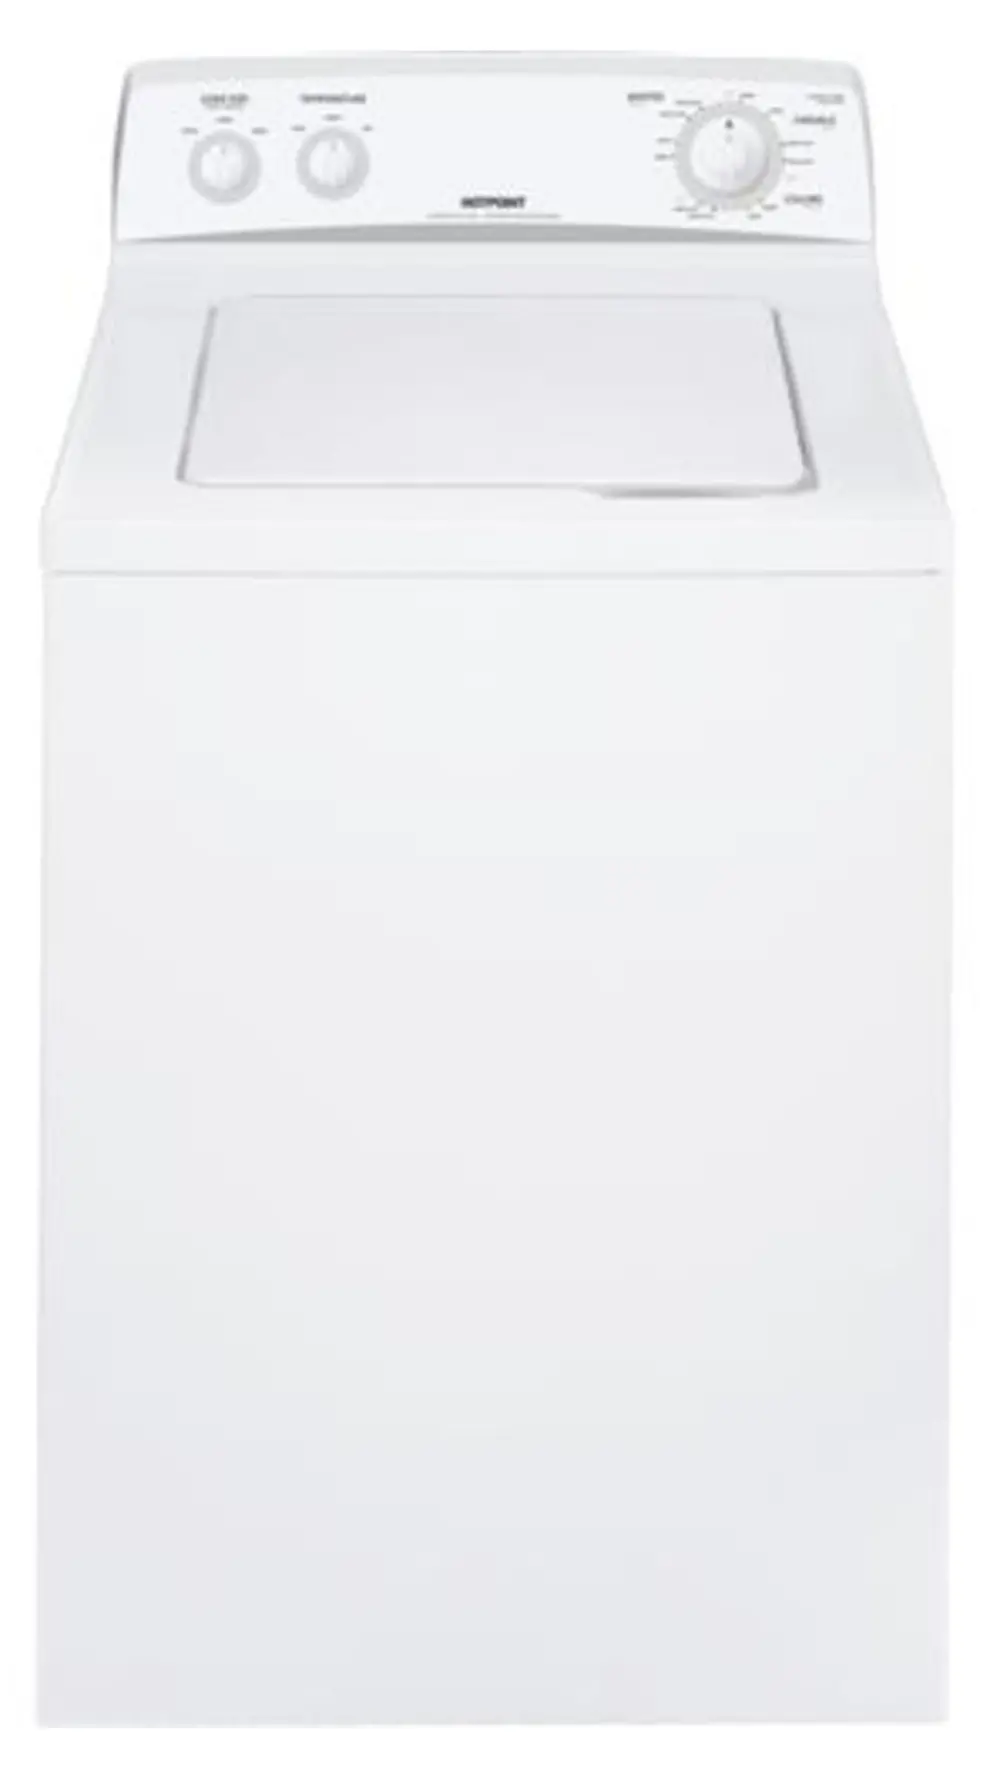 HSWP1000MWW Hotpoint White 3.6 cu. ft. Top Load Washer-1